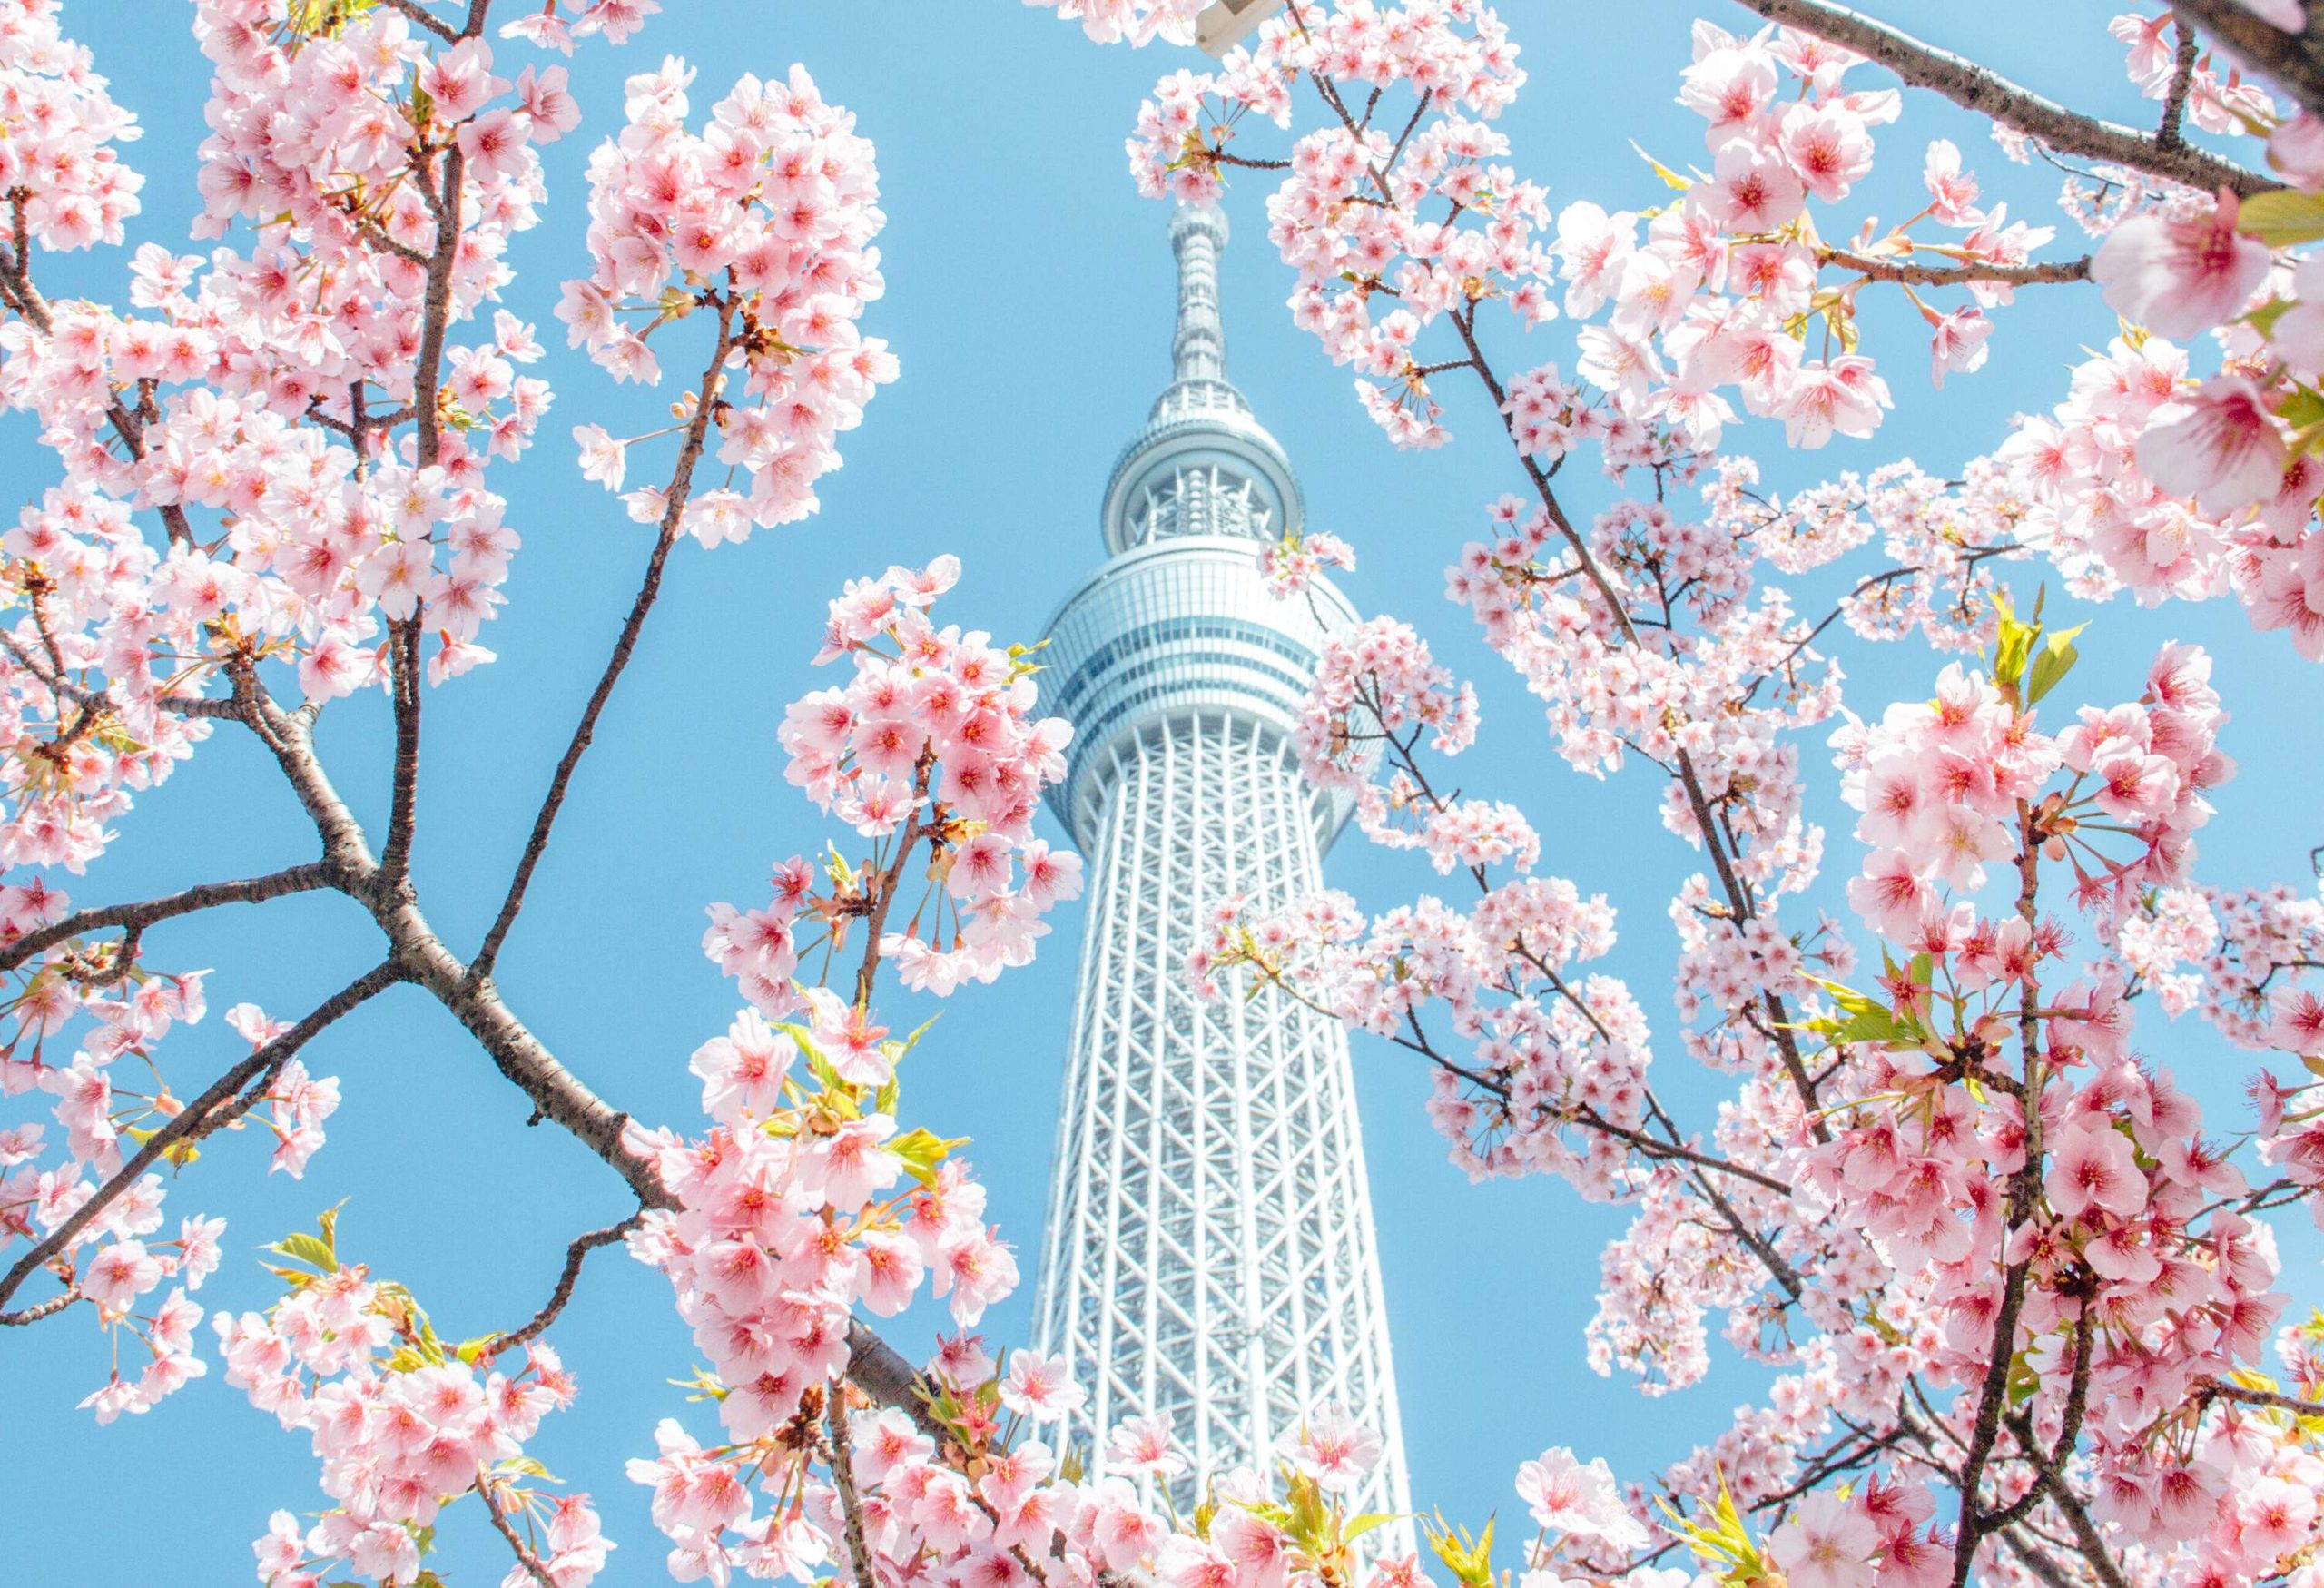 Clusters of pink cherry blossoms and the Tokyo Skytree against a clear blue sky.